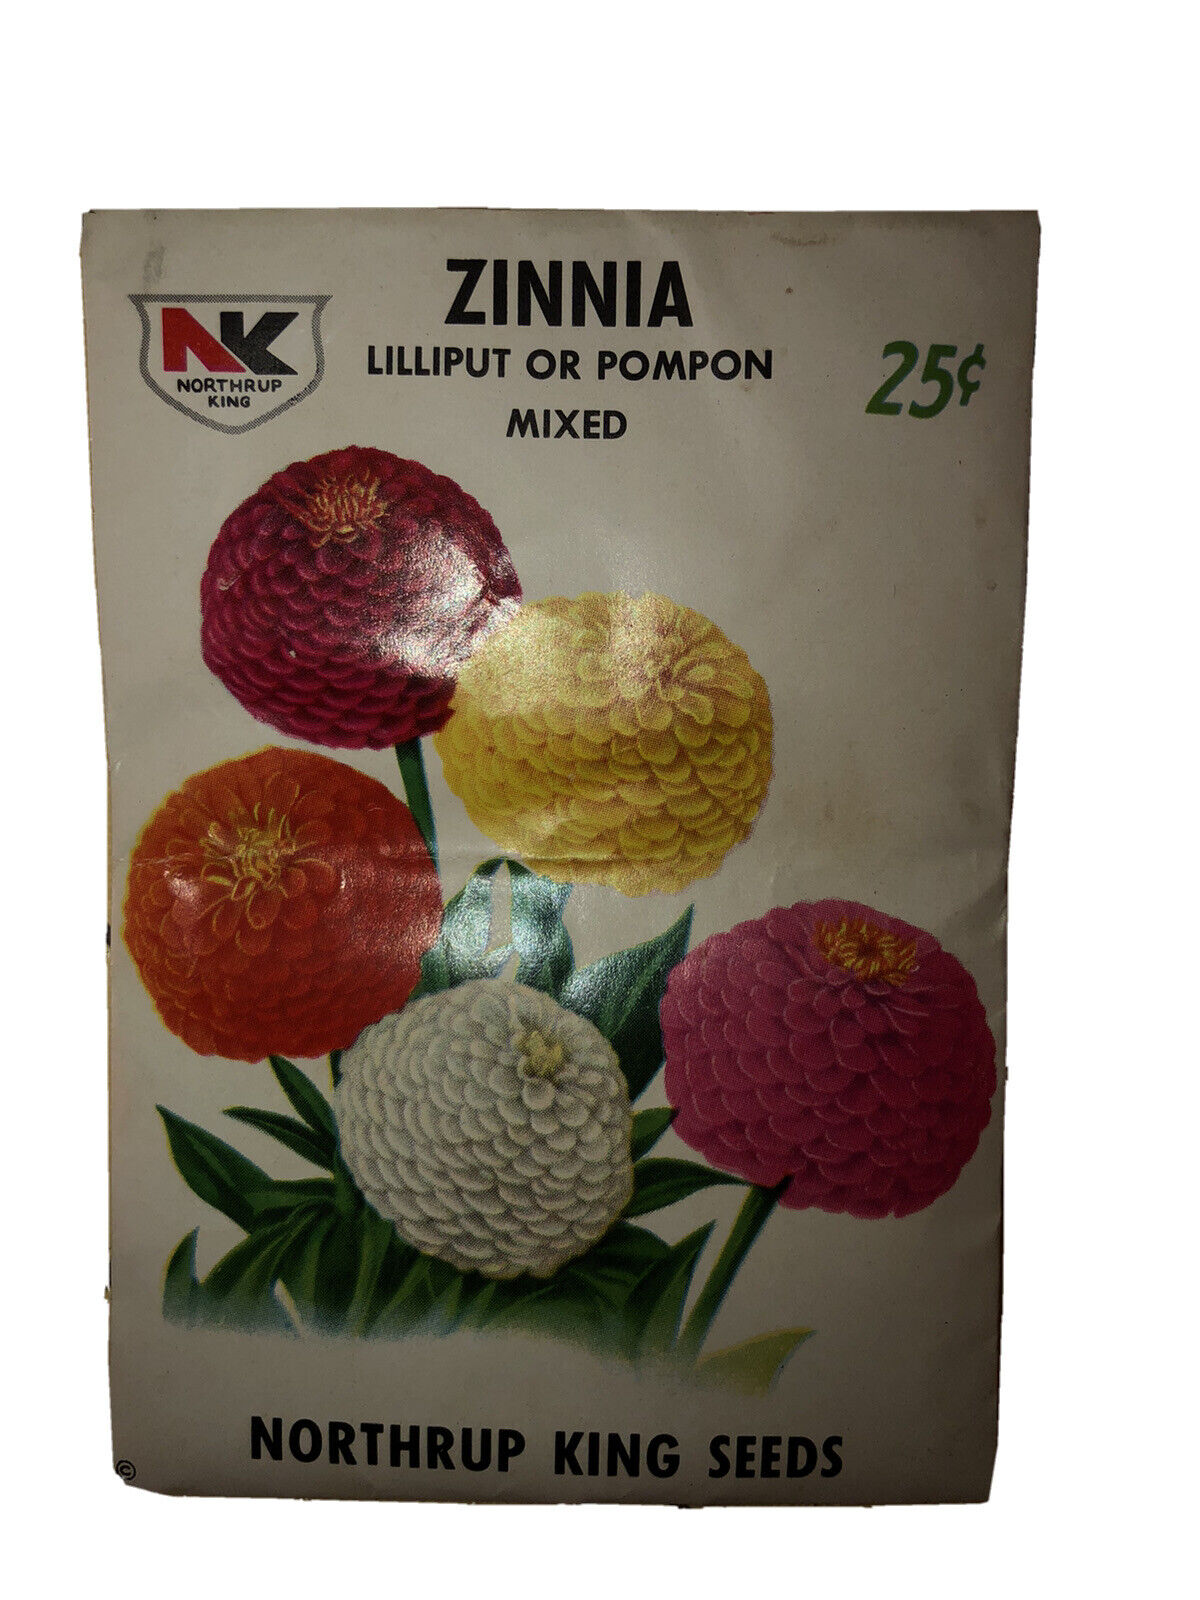 *Sealed* 1964 Northrup, King & Co. Zinnia Seed Growers Seeds Pack